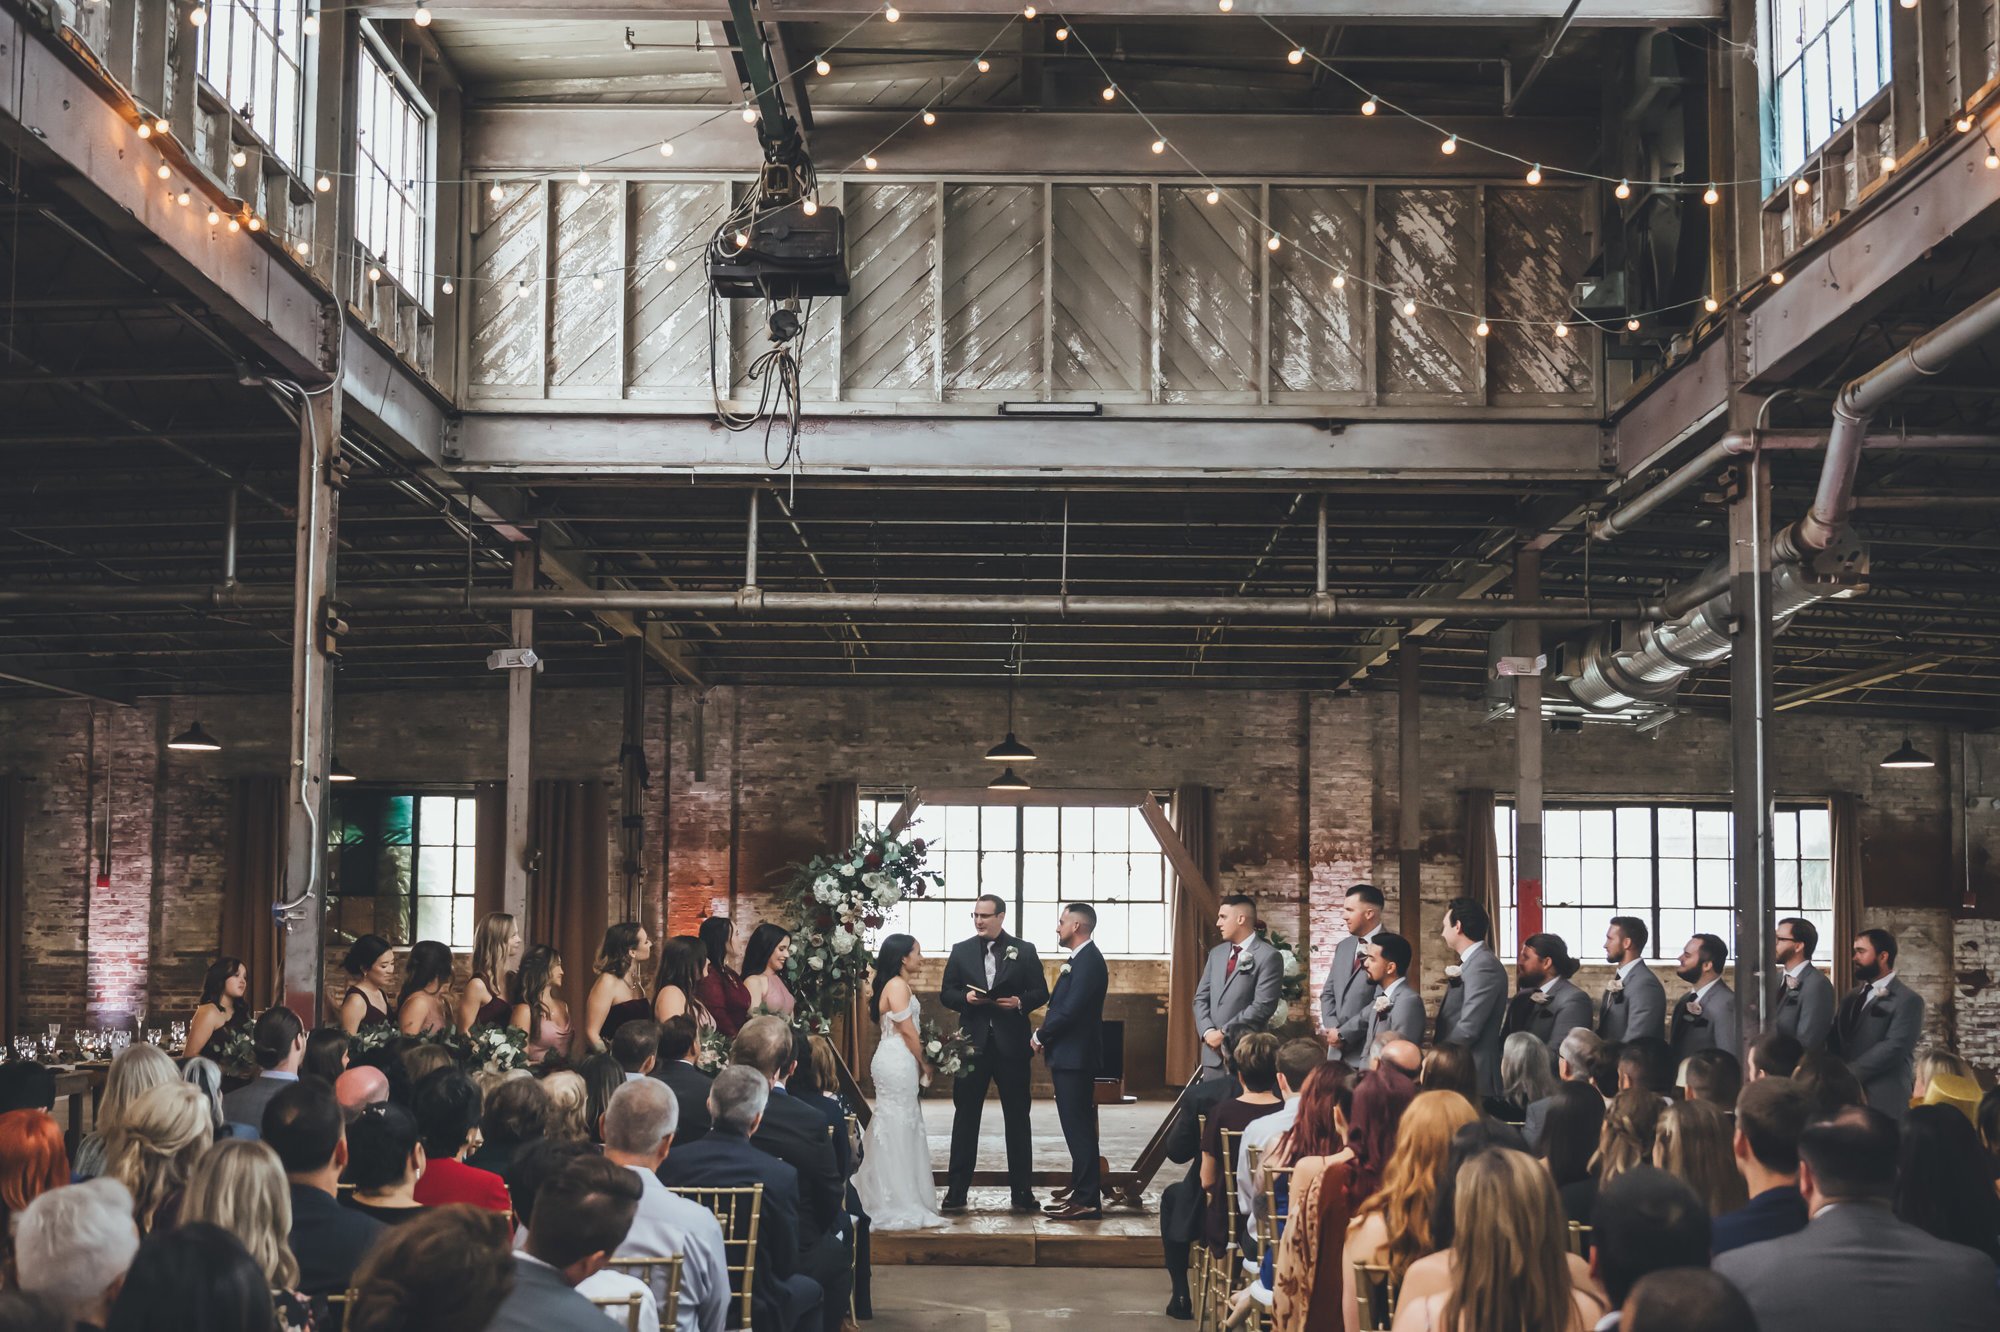 Industrial wedding ceremony at The Glass Factory in Jacksonville, Florida captured by Bow Tie Photo & Video.jpg